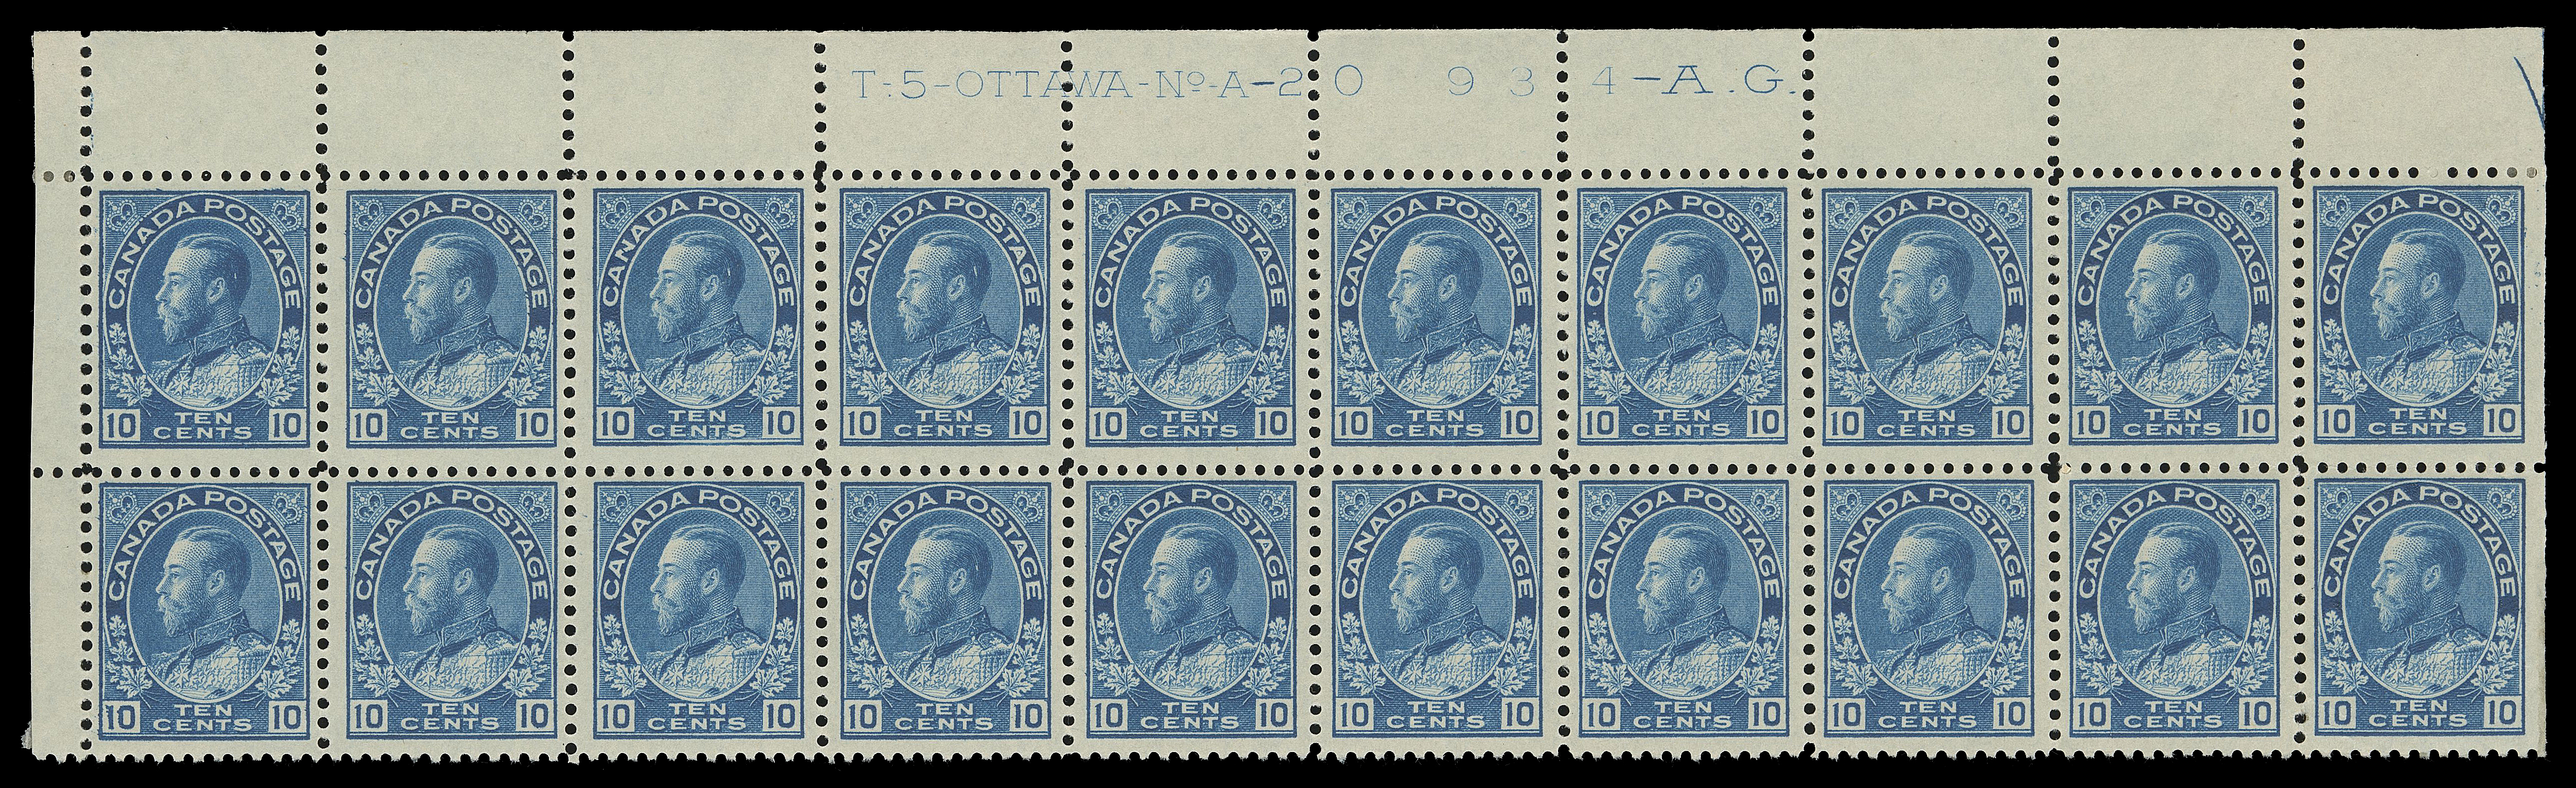 ADMIRAL STAMPS  117,An exceptionally fresh upper left Plate 20 block of twenty, nicely centered with radiant colour; natural gum inclusion on position 18, hinged at end, leaving sixteen stamps NH. A rarely seen intact plate multiple; by far the largest reported in the Glen Lundeen census on the BNAPS website, other two known multiples are a strip of four and a block of six, VF (Unitrade cat. $4,680)

Provenance: C.M. Jephcott, Maresch Sale 241, June 1990; Lot 870